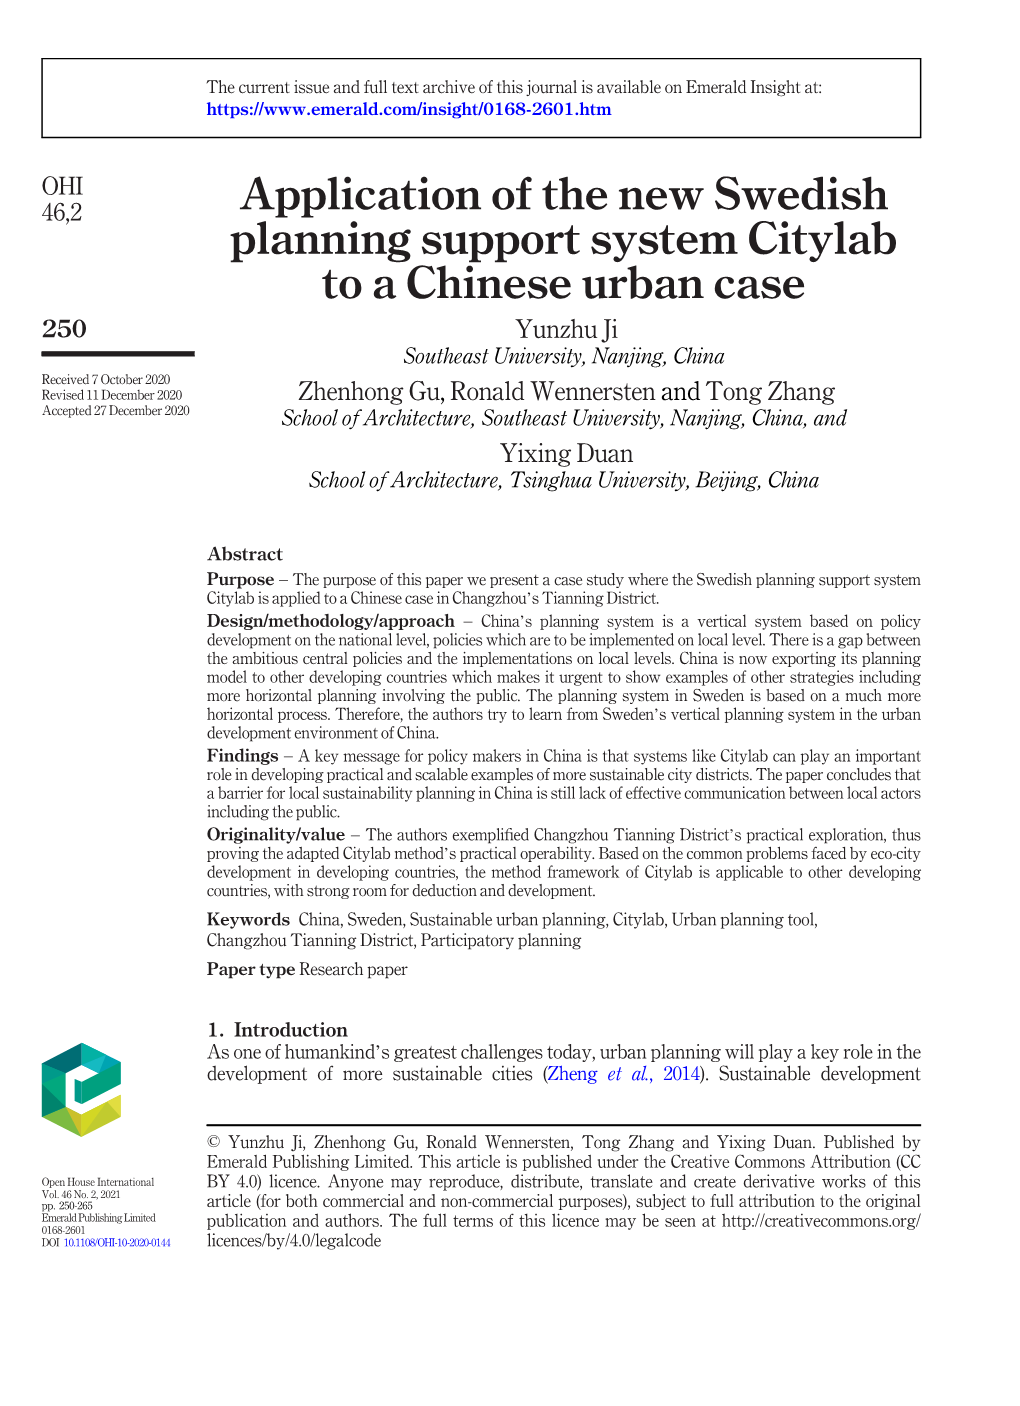 Application of the New Swedish Planning Support System Citylab To